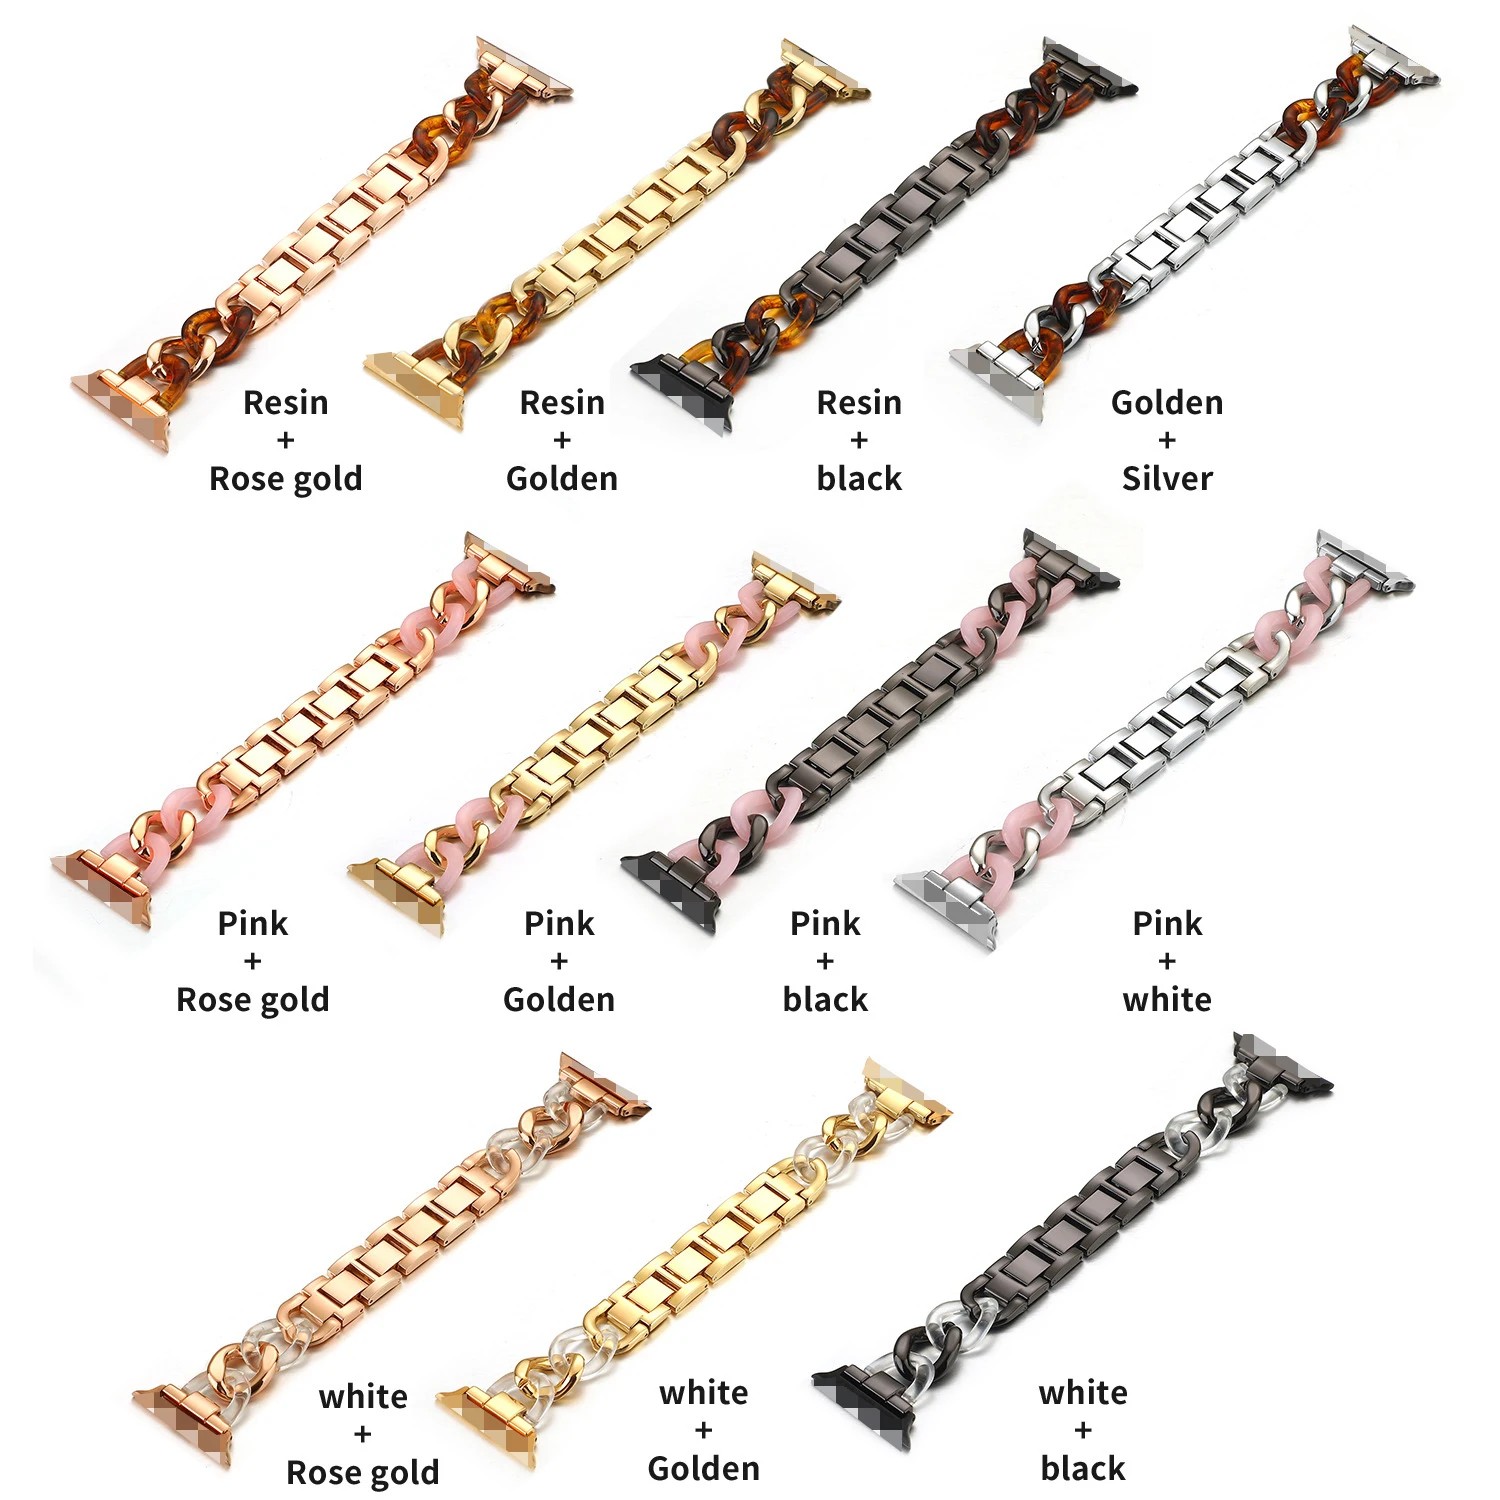 

High Quality Resin Stainless Steel Replacement Bracelet Wrist Watch Band Straps For Apple Watch Metal Resin Strap, Many colors are available